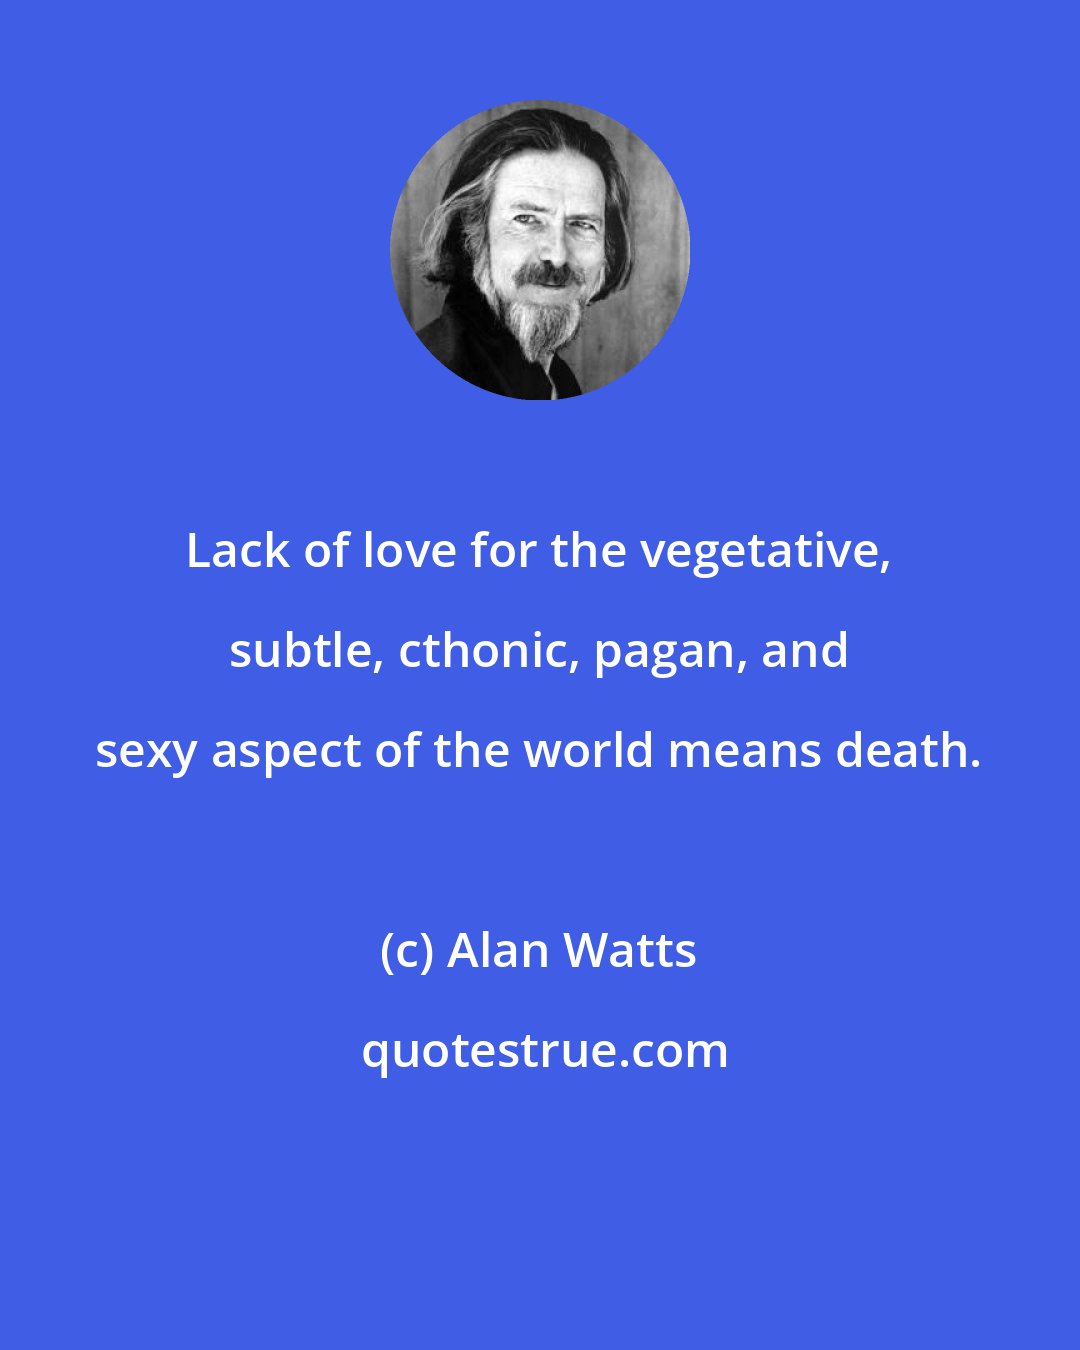 Alan Watts: Lack of love for the vegetative, subtle, cthonic, pagan, and sexy aspect of the world means death.